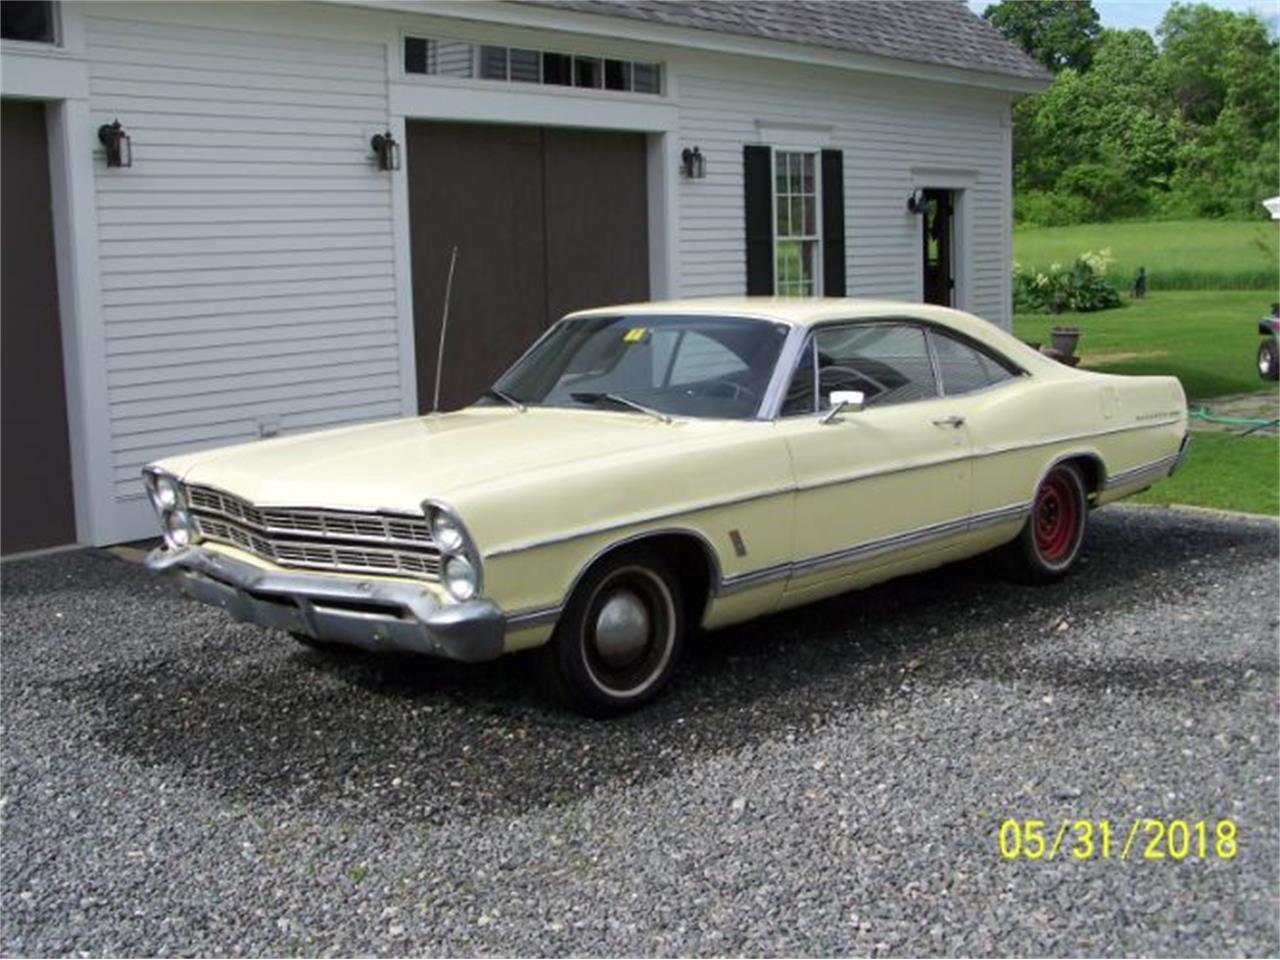 1967 Ford Galaxie 500 For Sale Classiccars Com Cc 1126836